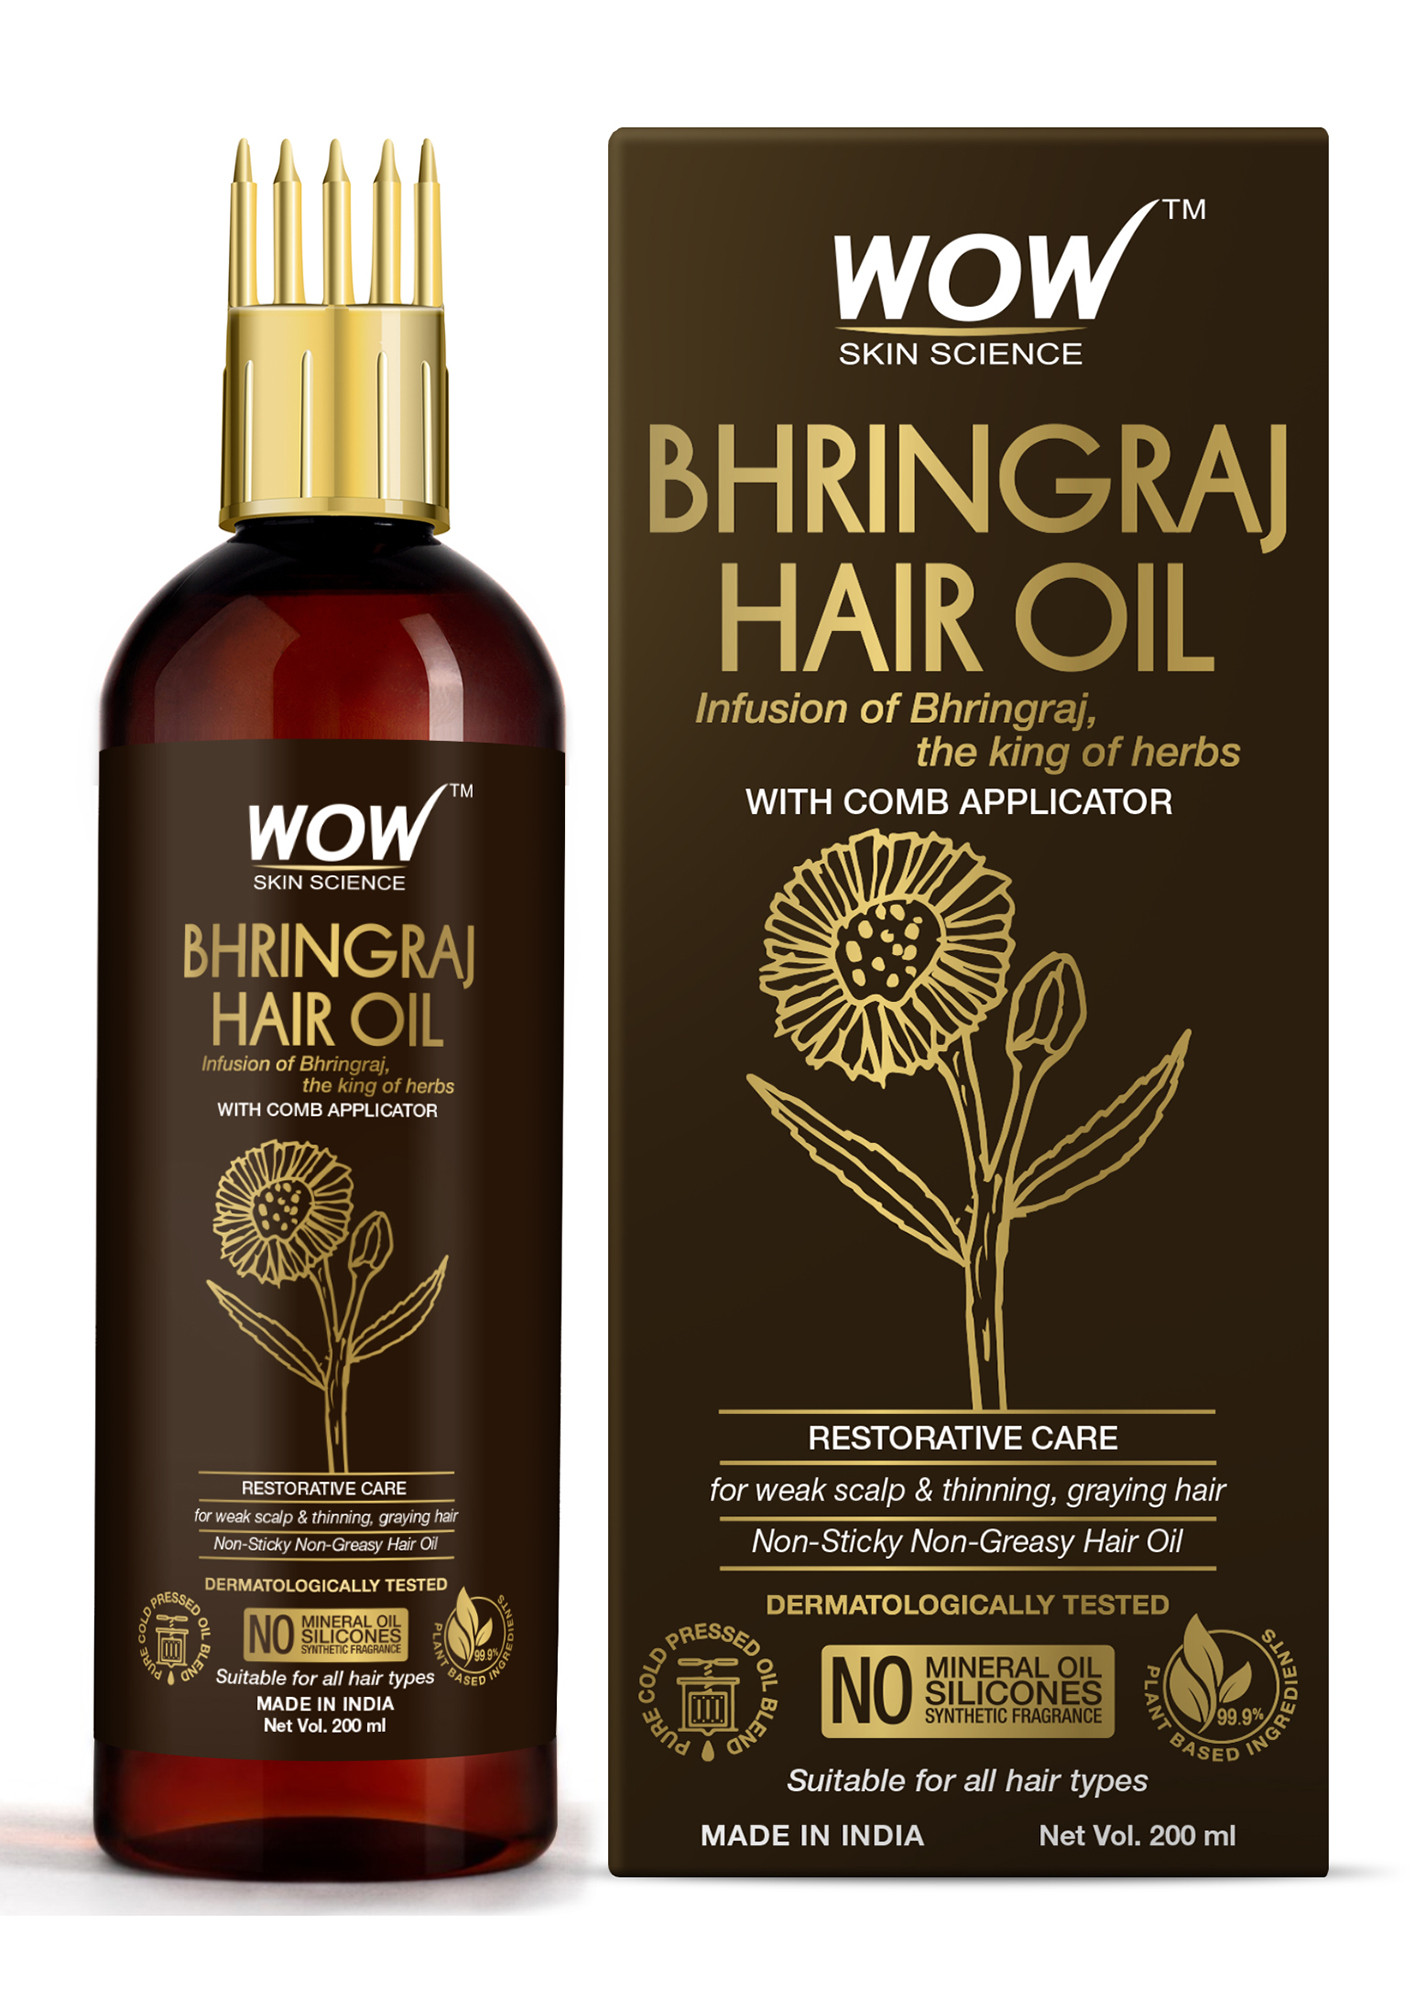 WOW Skin Science Bhringraj Hair Oil - Non Sticky & Greasy - with Comb Applicator - for All Hair Types - Non-Sticky & Non-Greasy Hair Oil - No Mineral Oil, Silicones, Synthetic Fragrance - 200mL